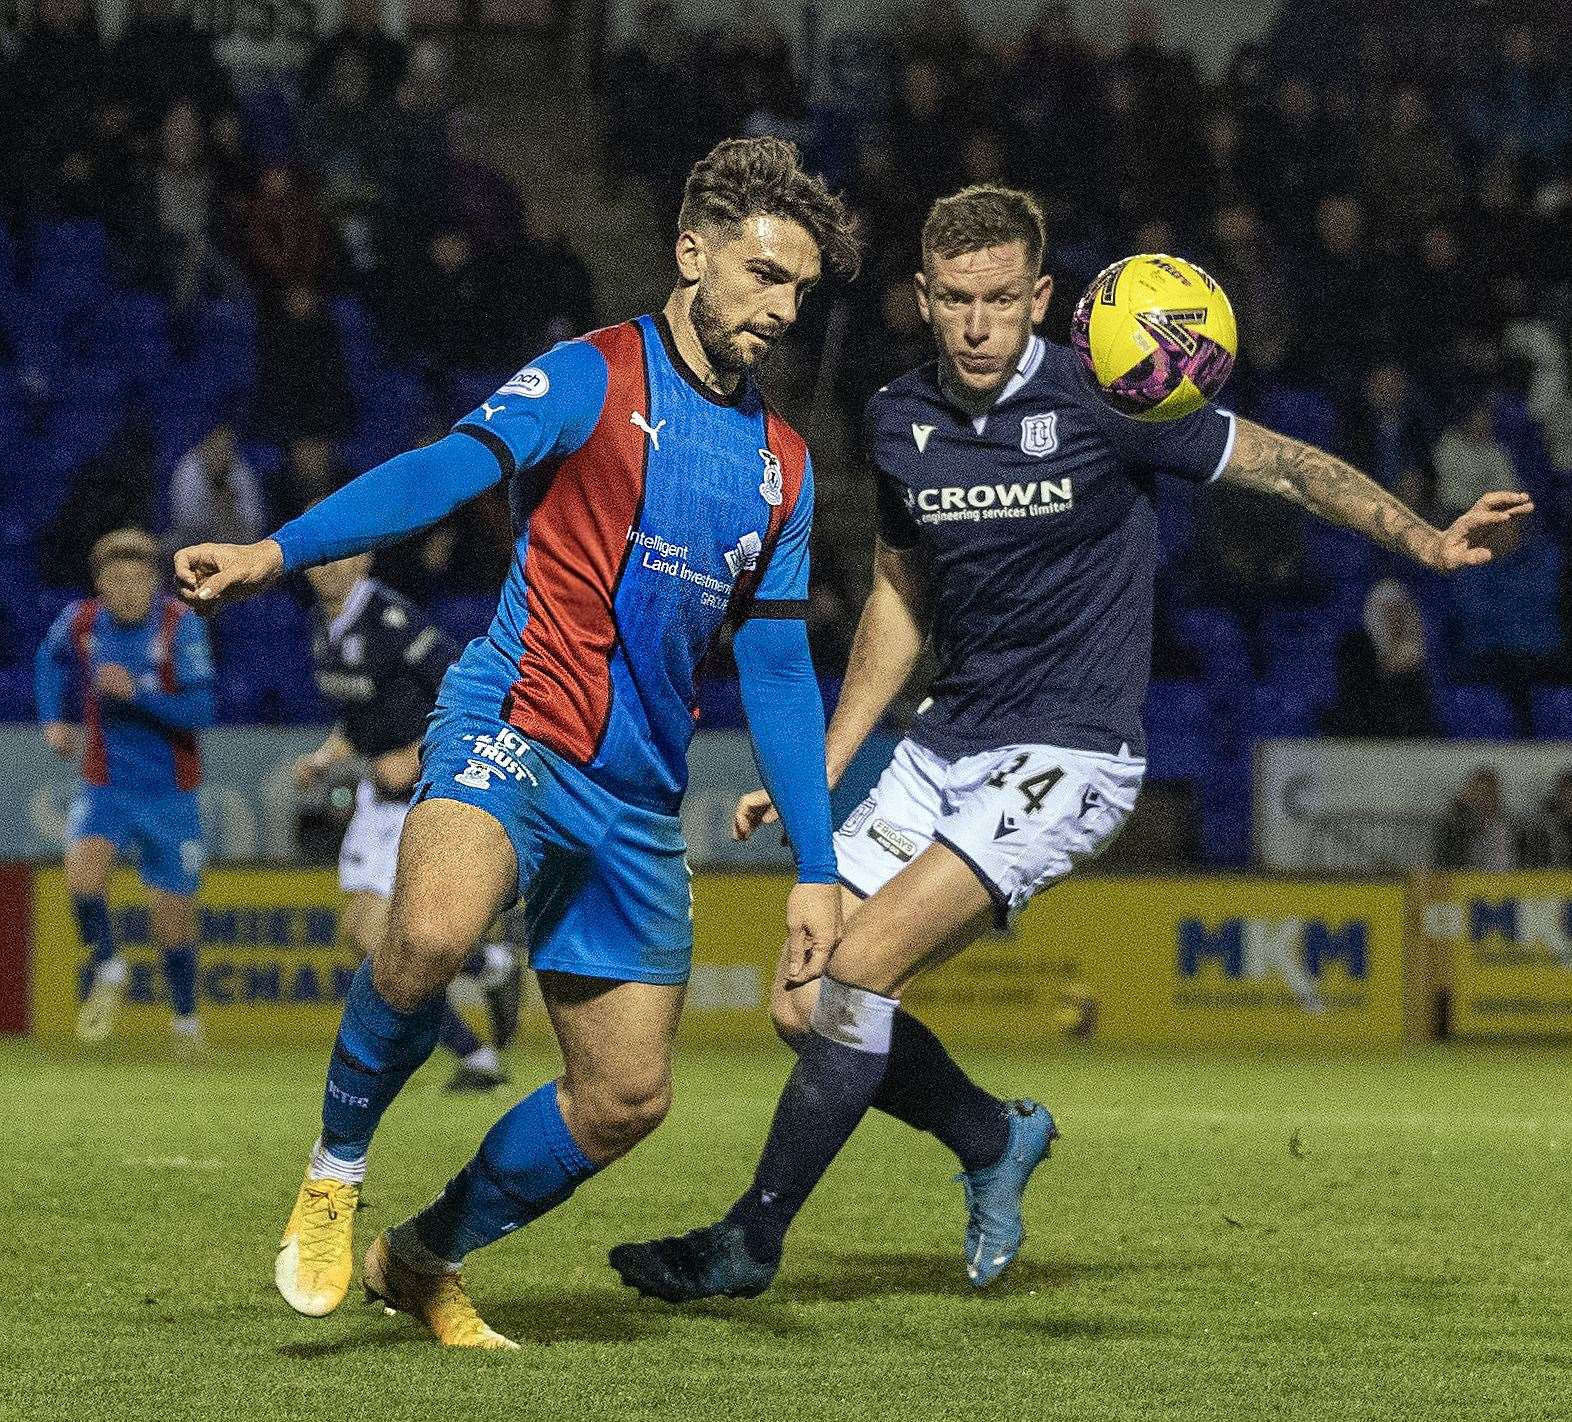 George Oakley (left) in action for Caley Thistle.